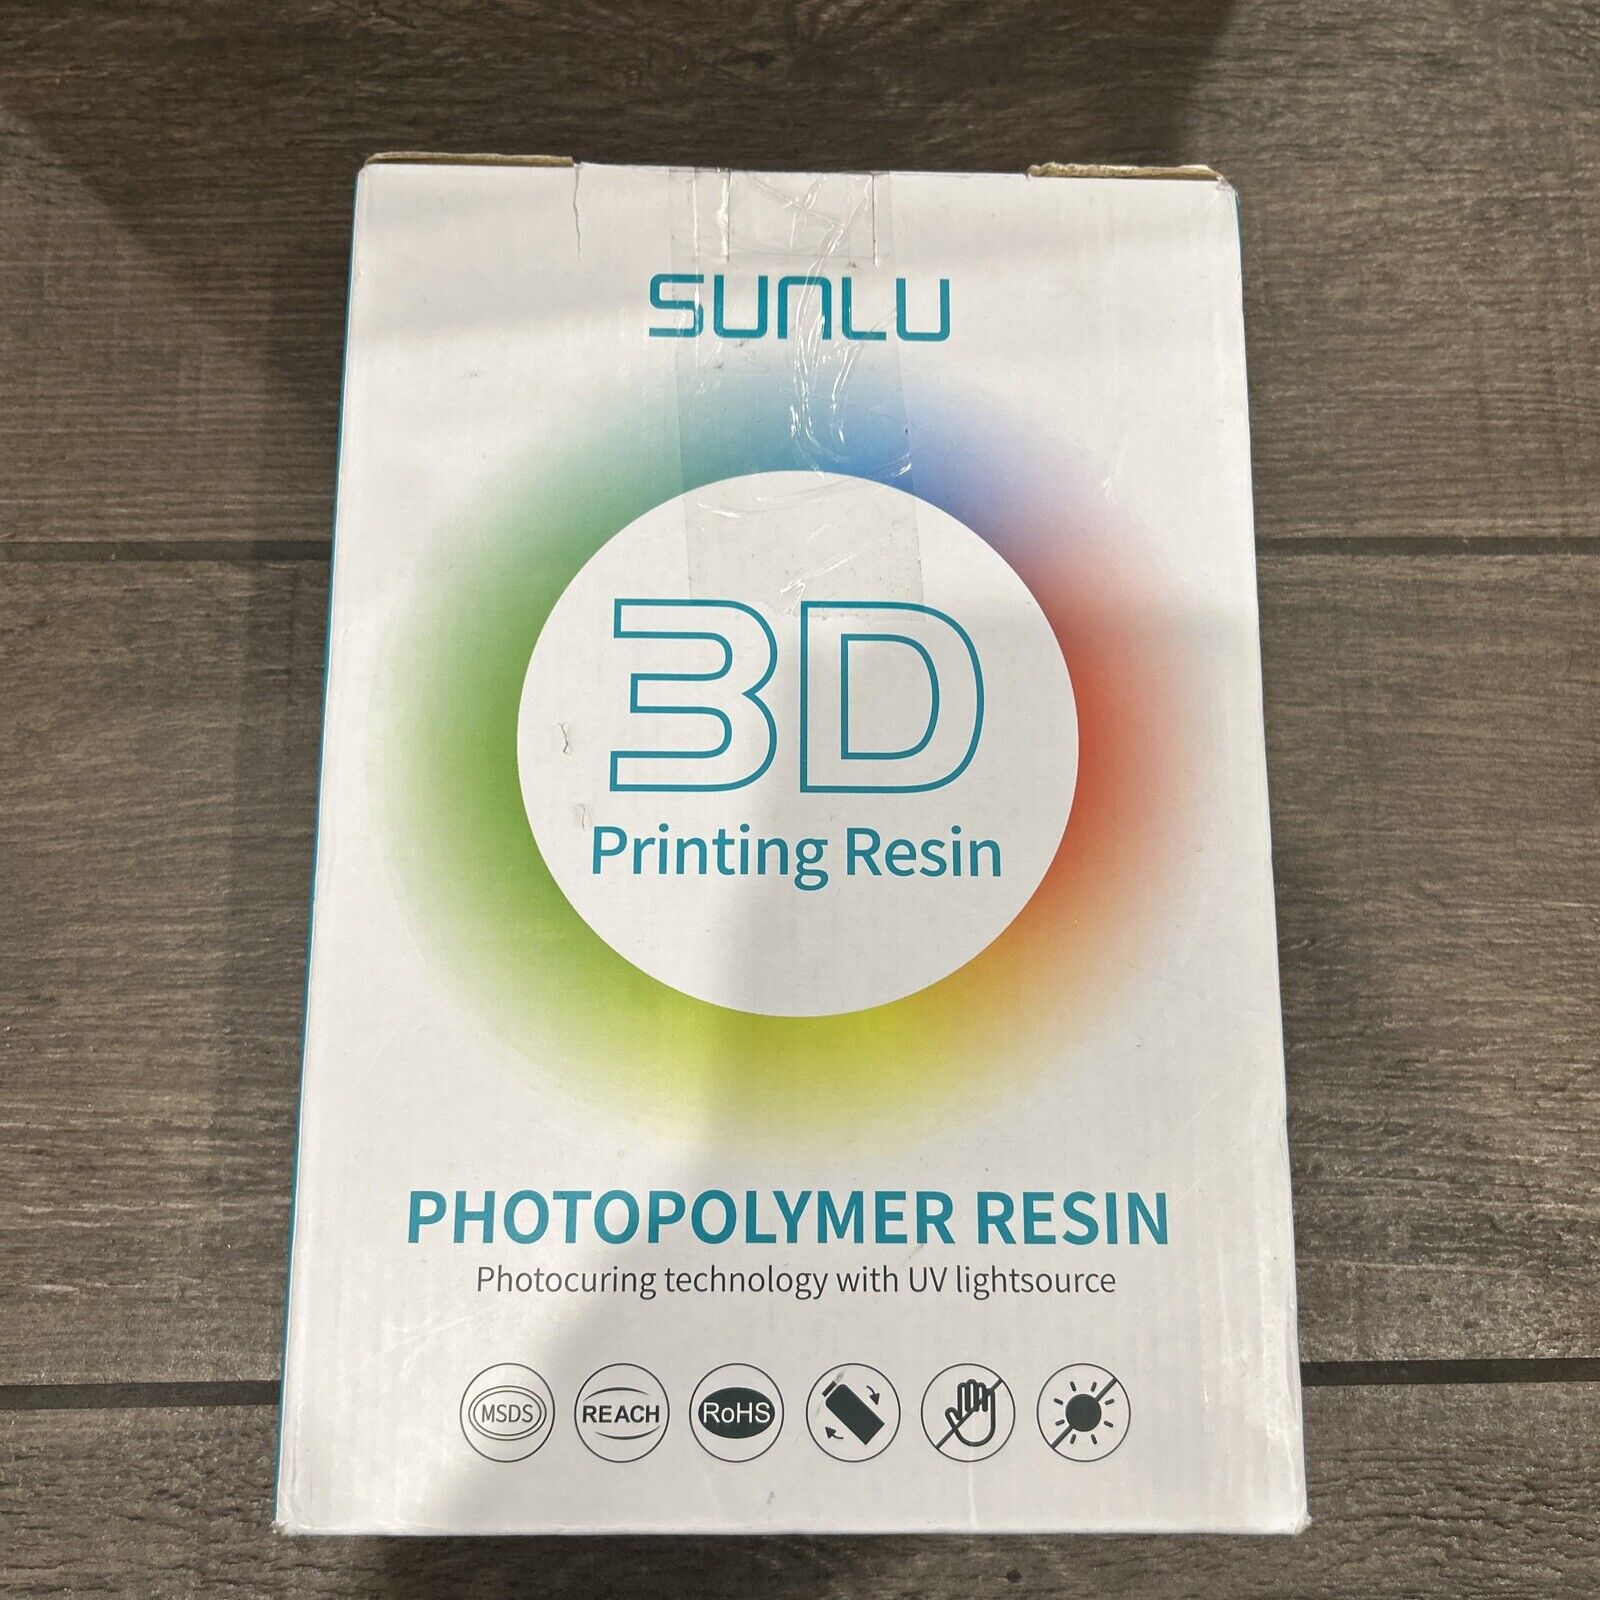 Sunlu 3D LCD Printing Photopolymer Resin in Solid Grey, 2000g